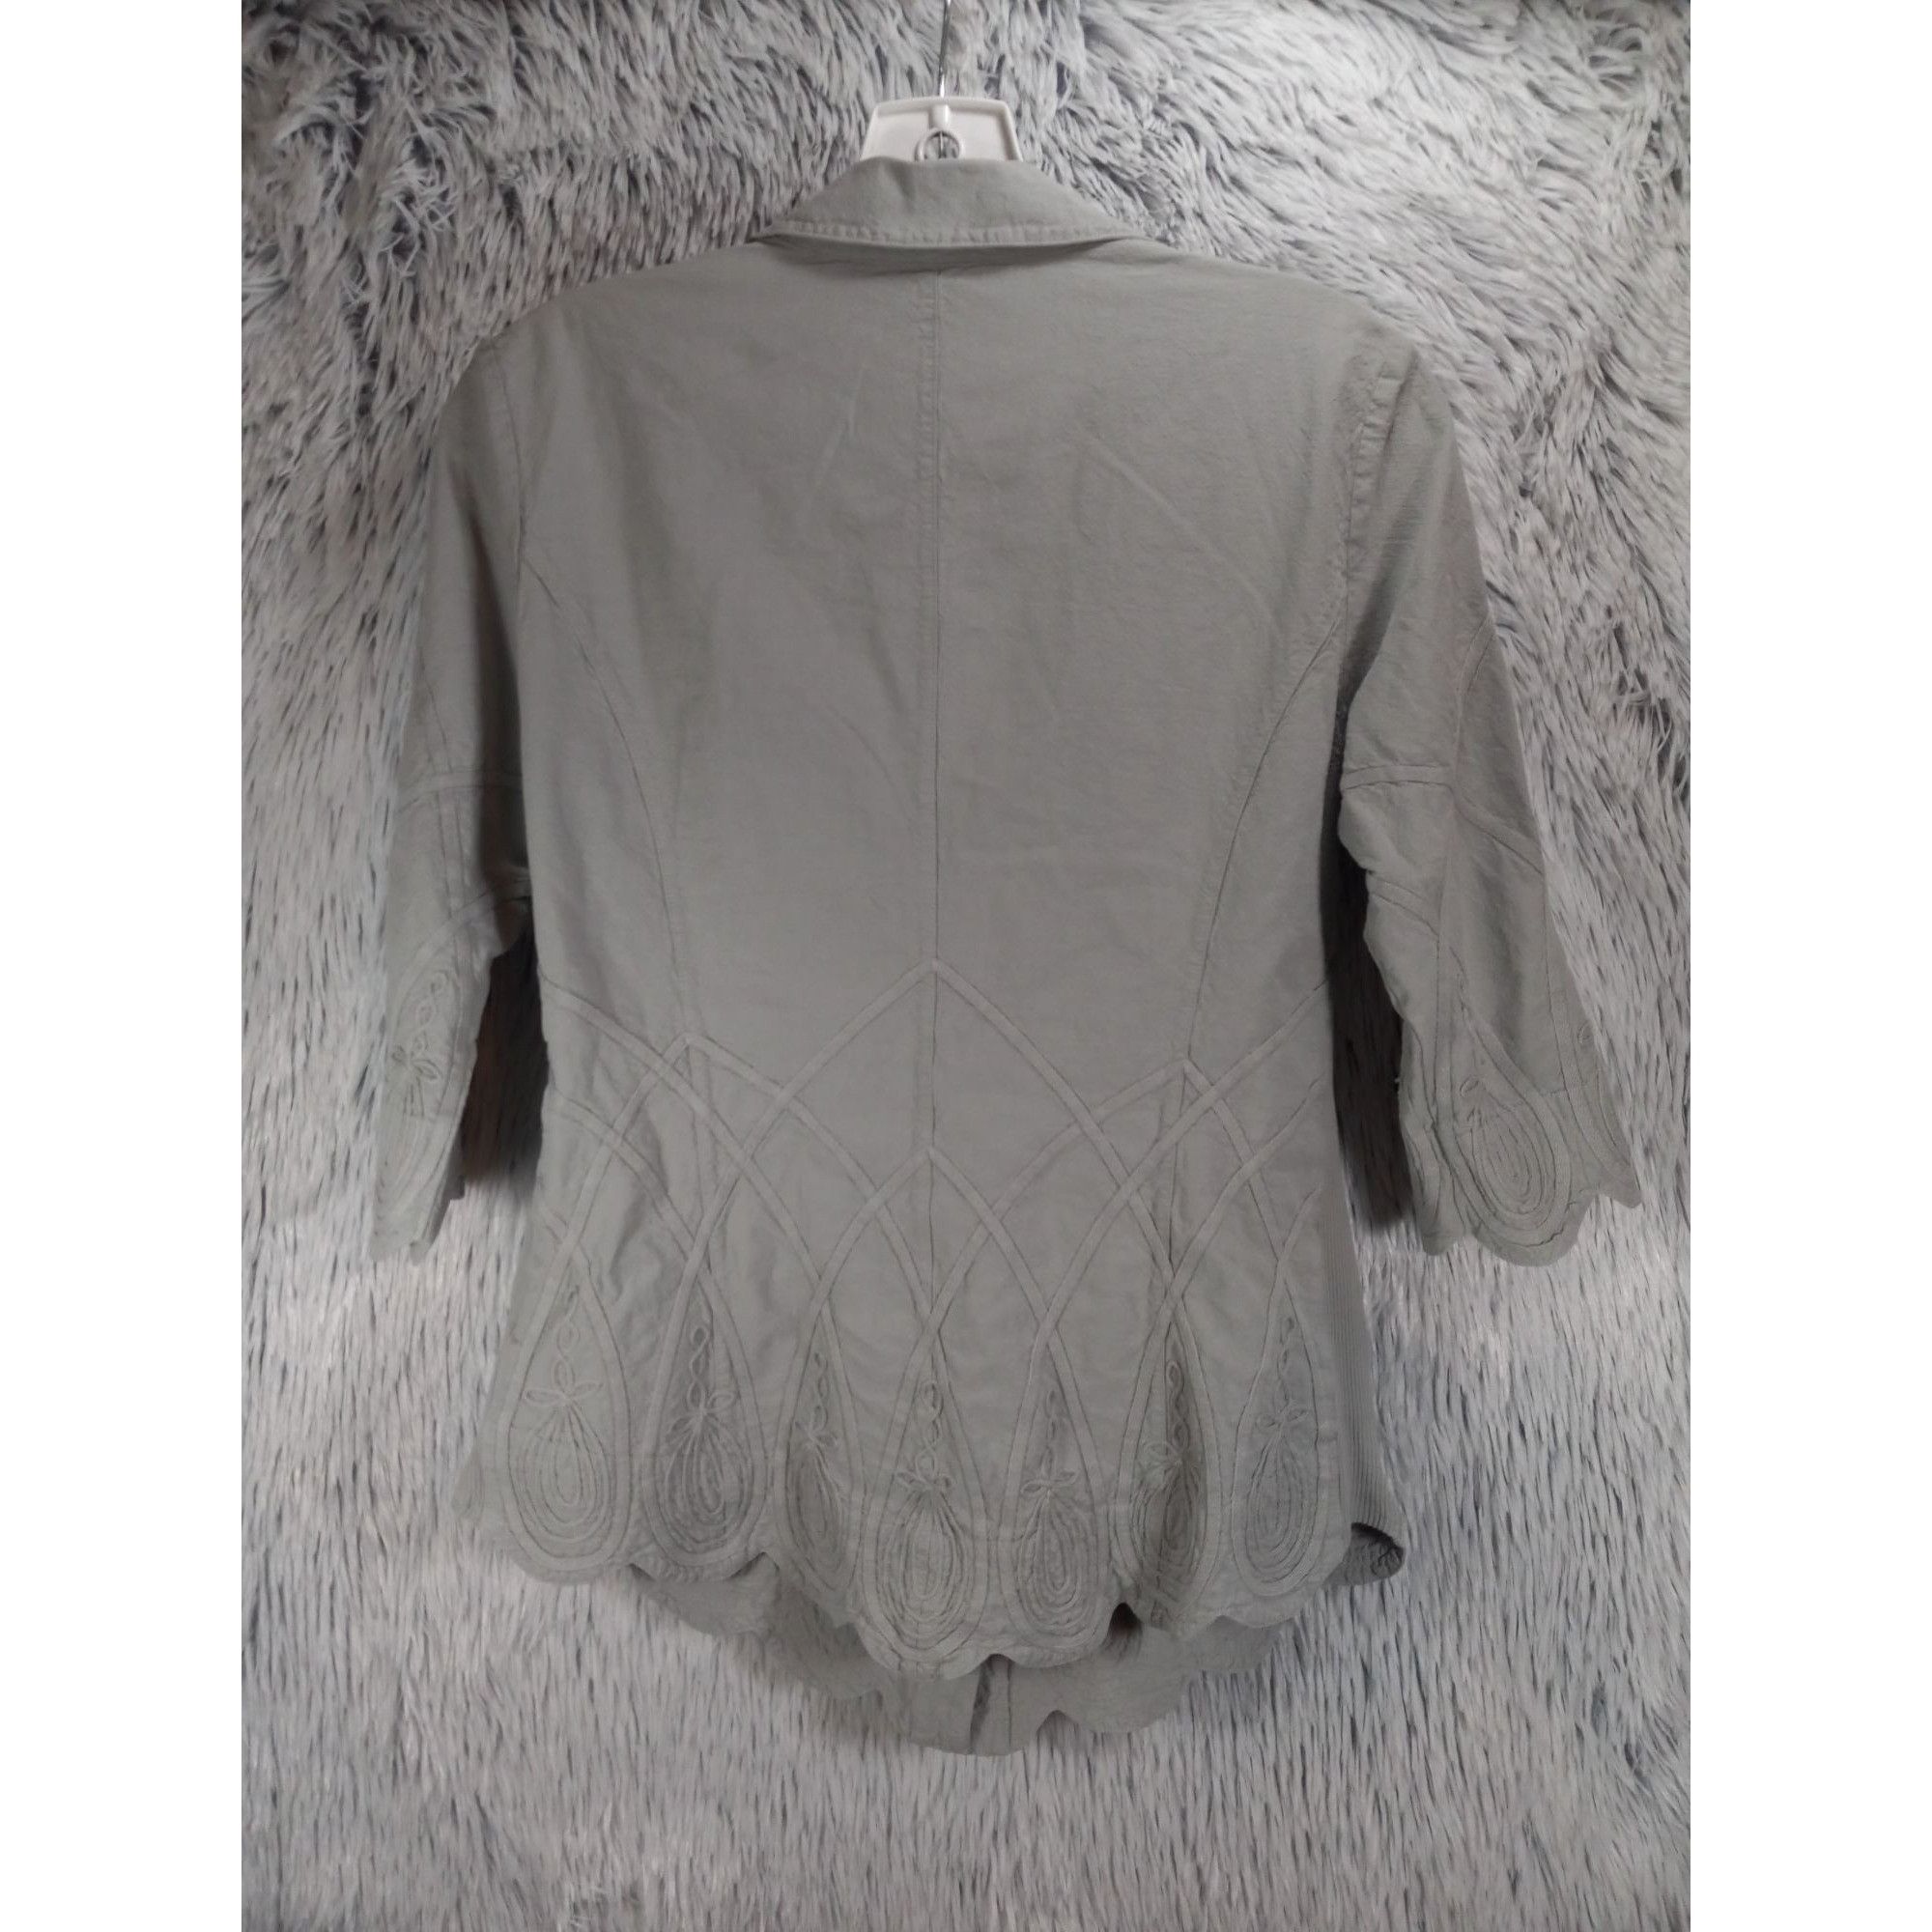 Softs Soft Surroundings Blouse Womans XS Gray Collared Embroidered Size XS / US 0-2 / IT 36-38 - 2 Preview